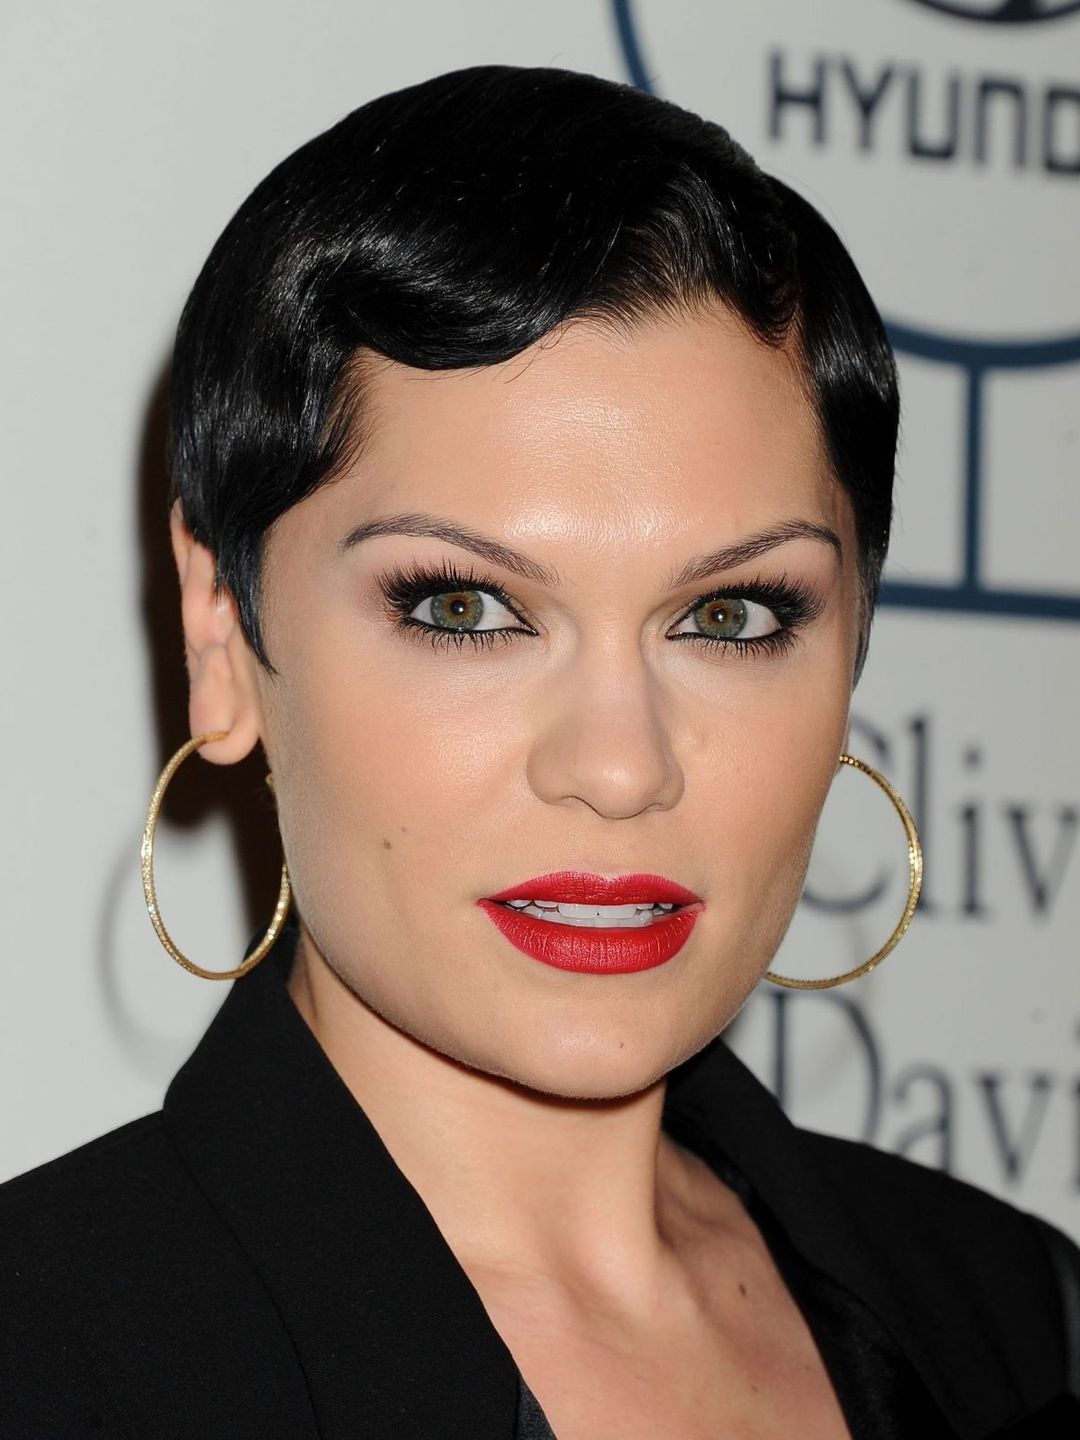 Jessie J who are her parents